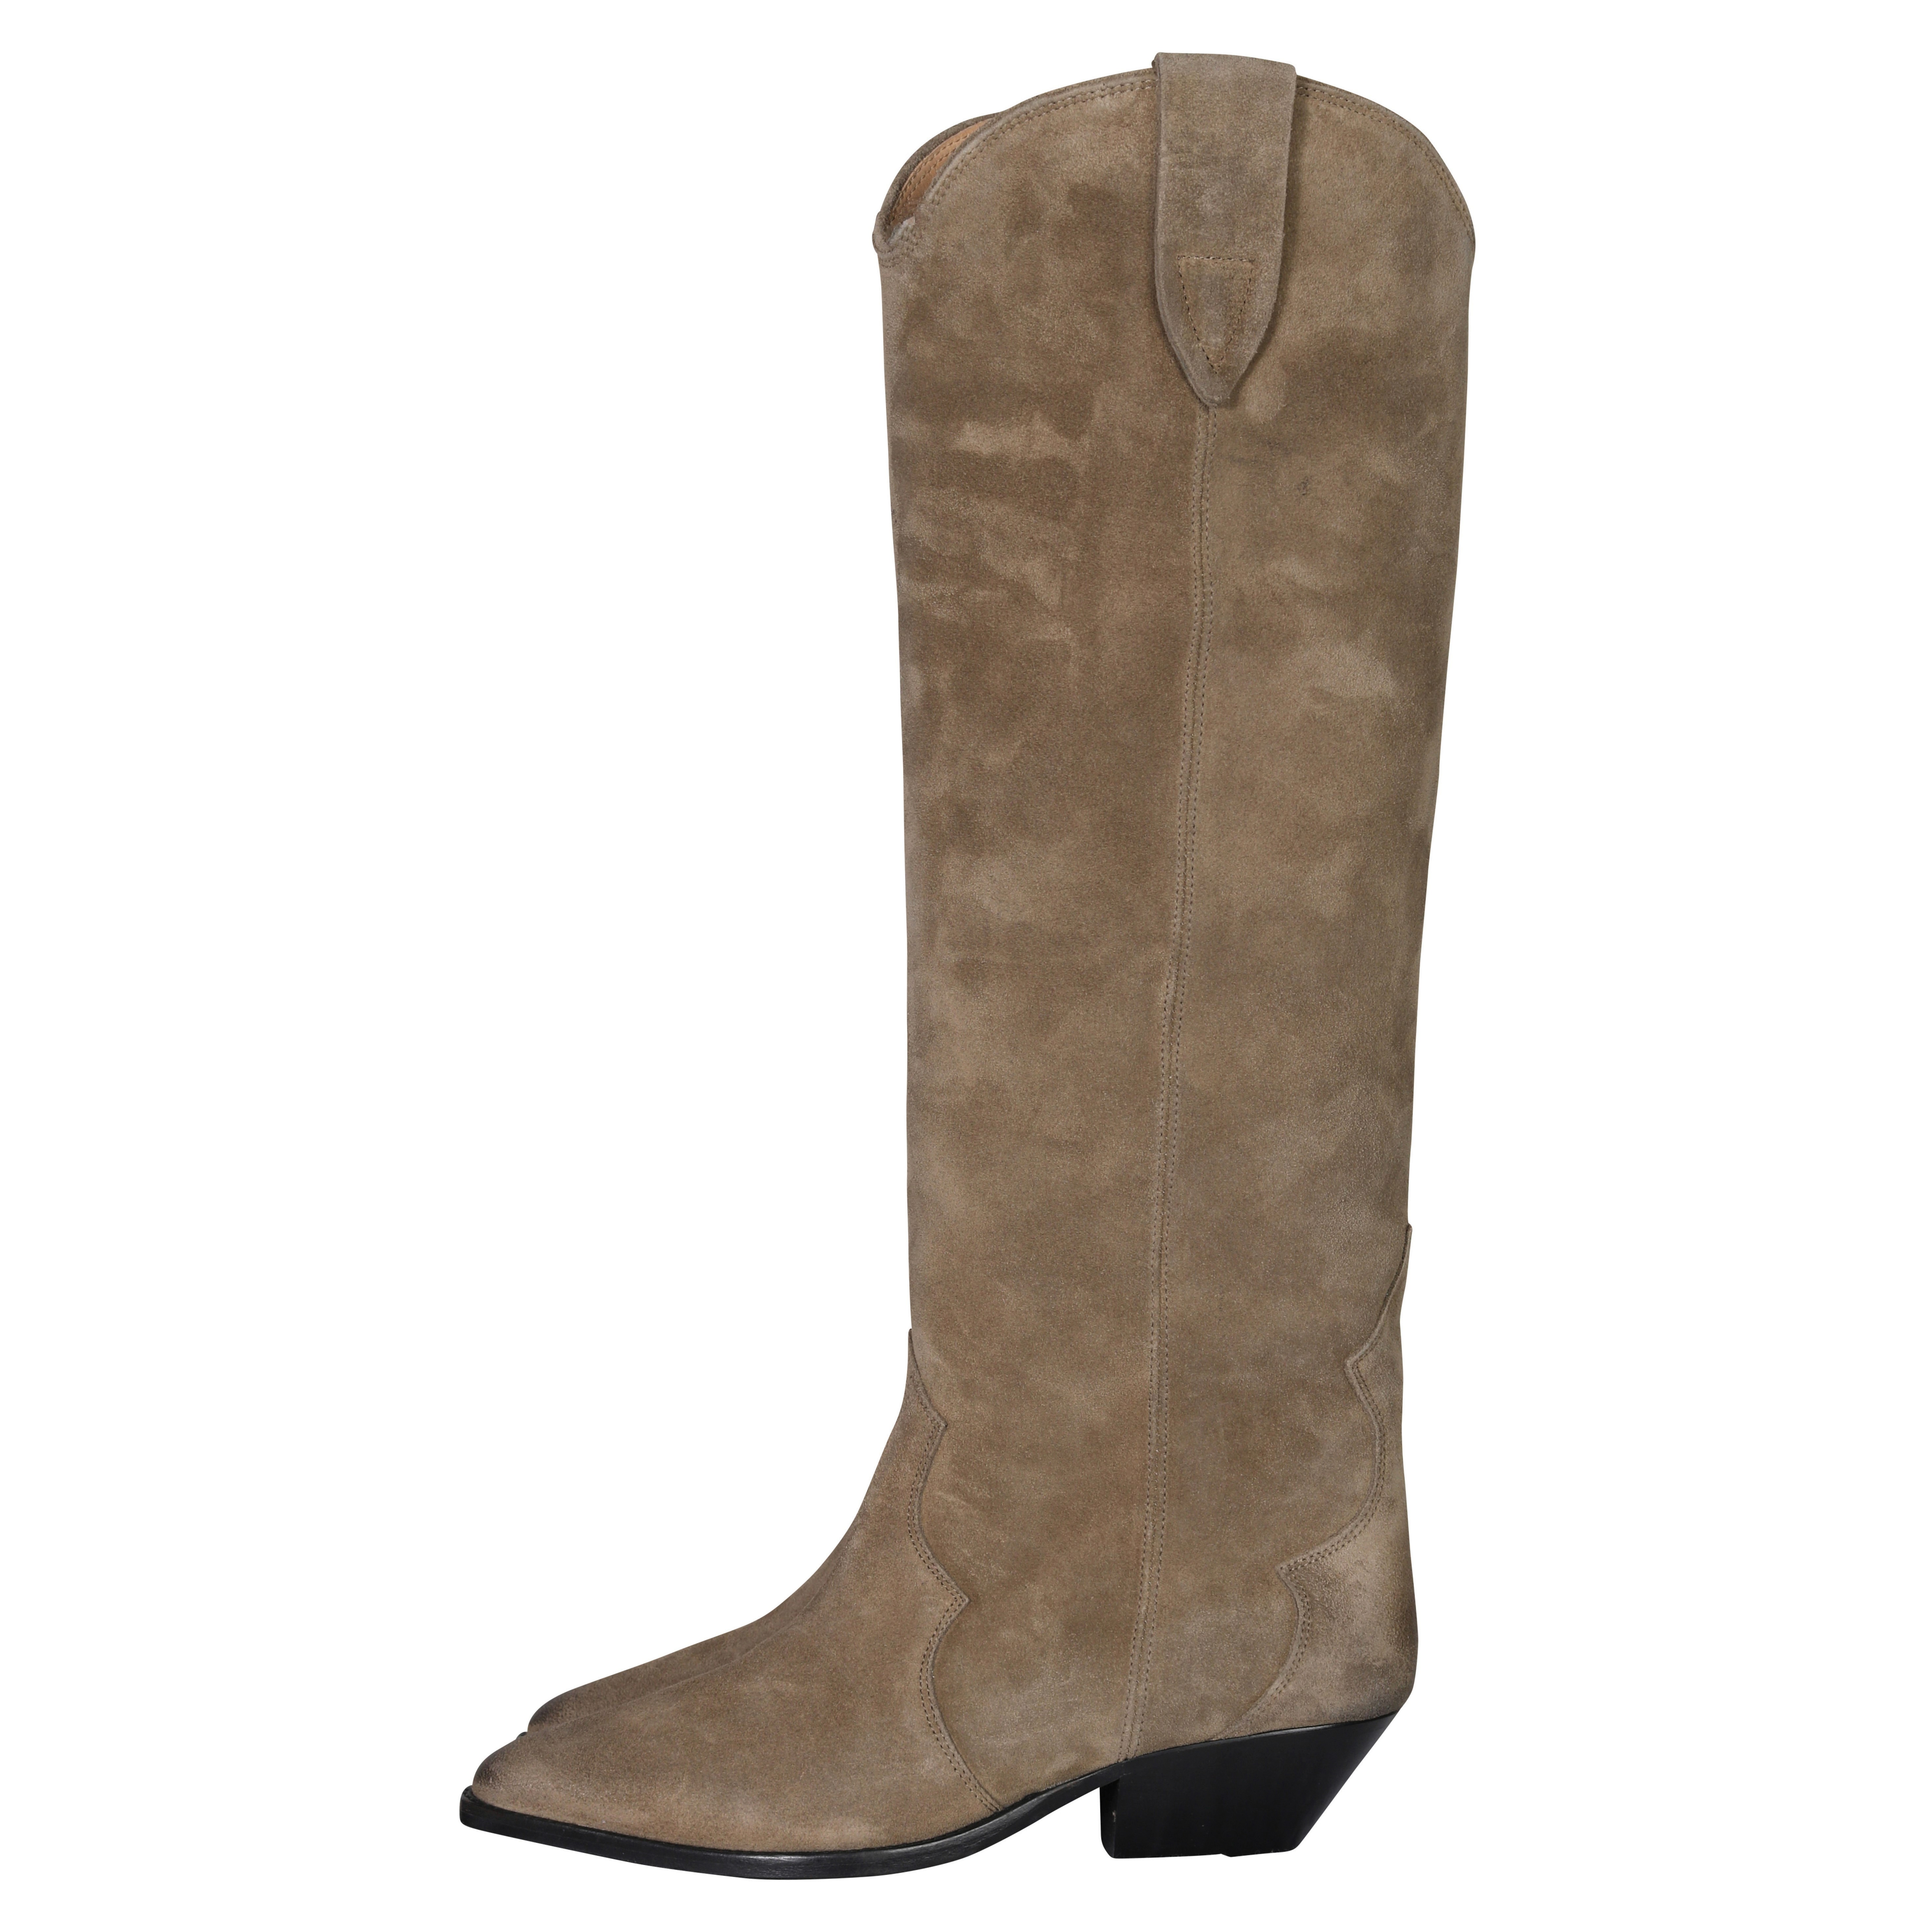 Isabel Marant Denvee High Boots in Taupe